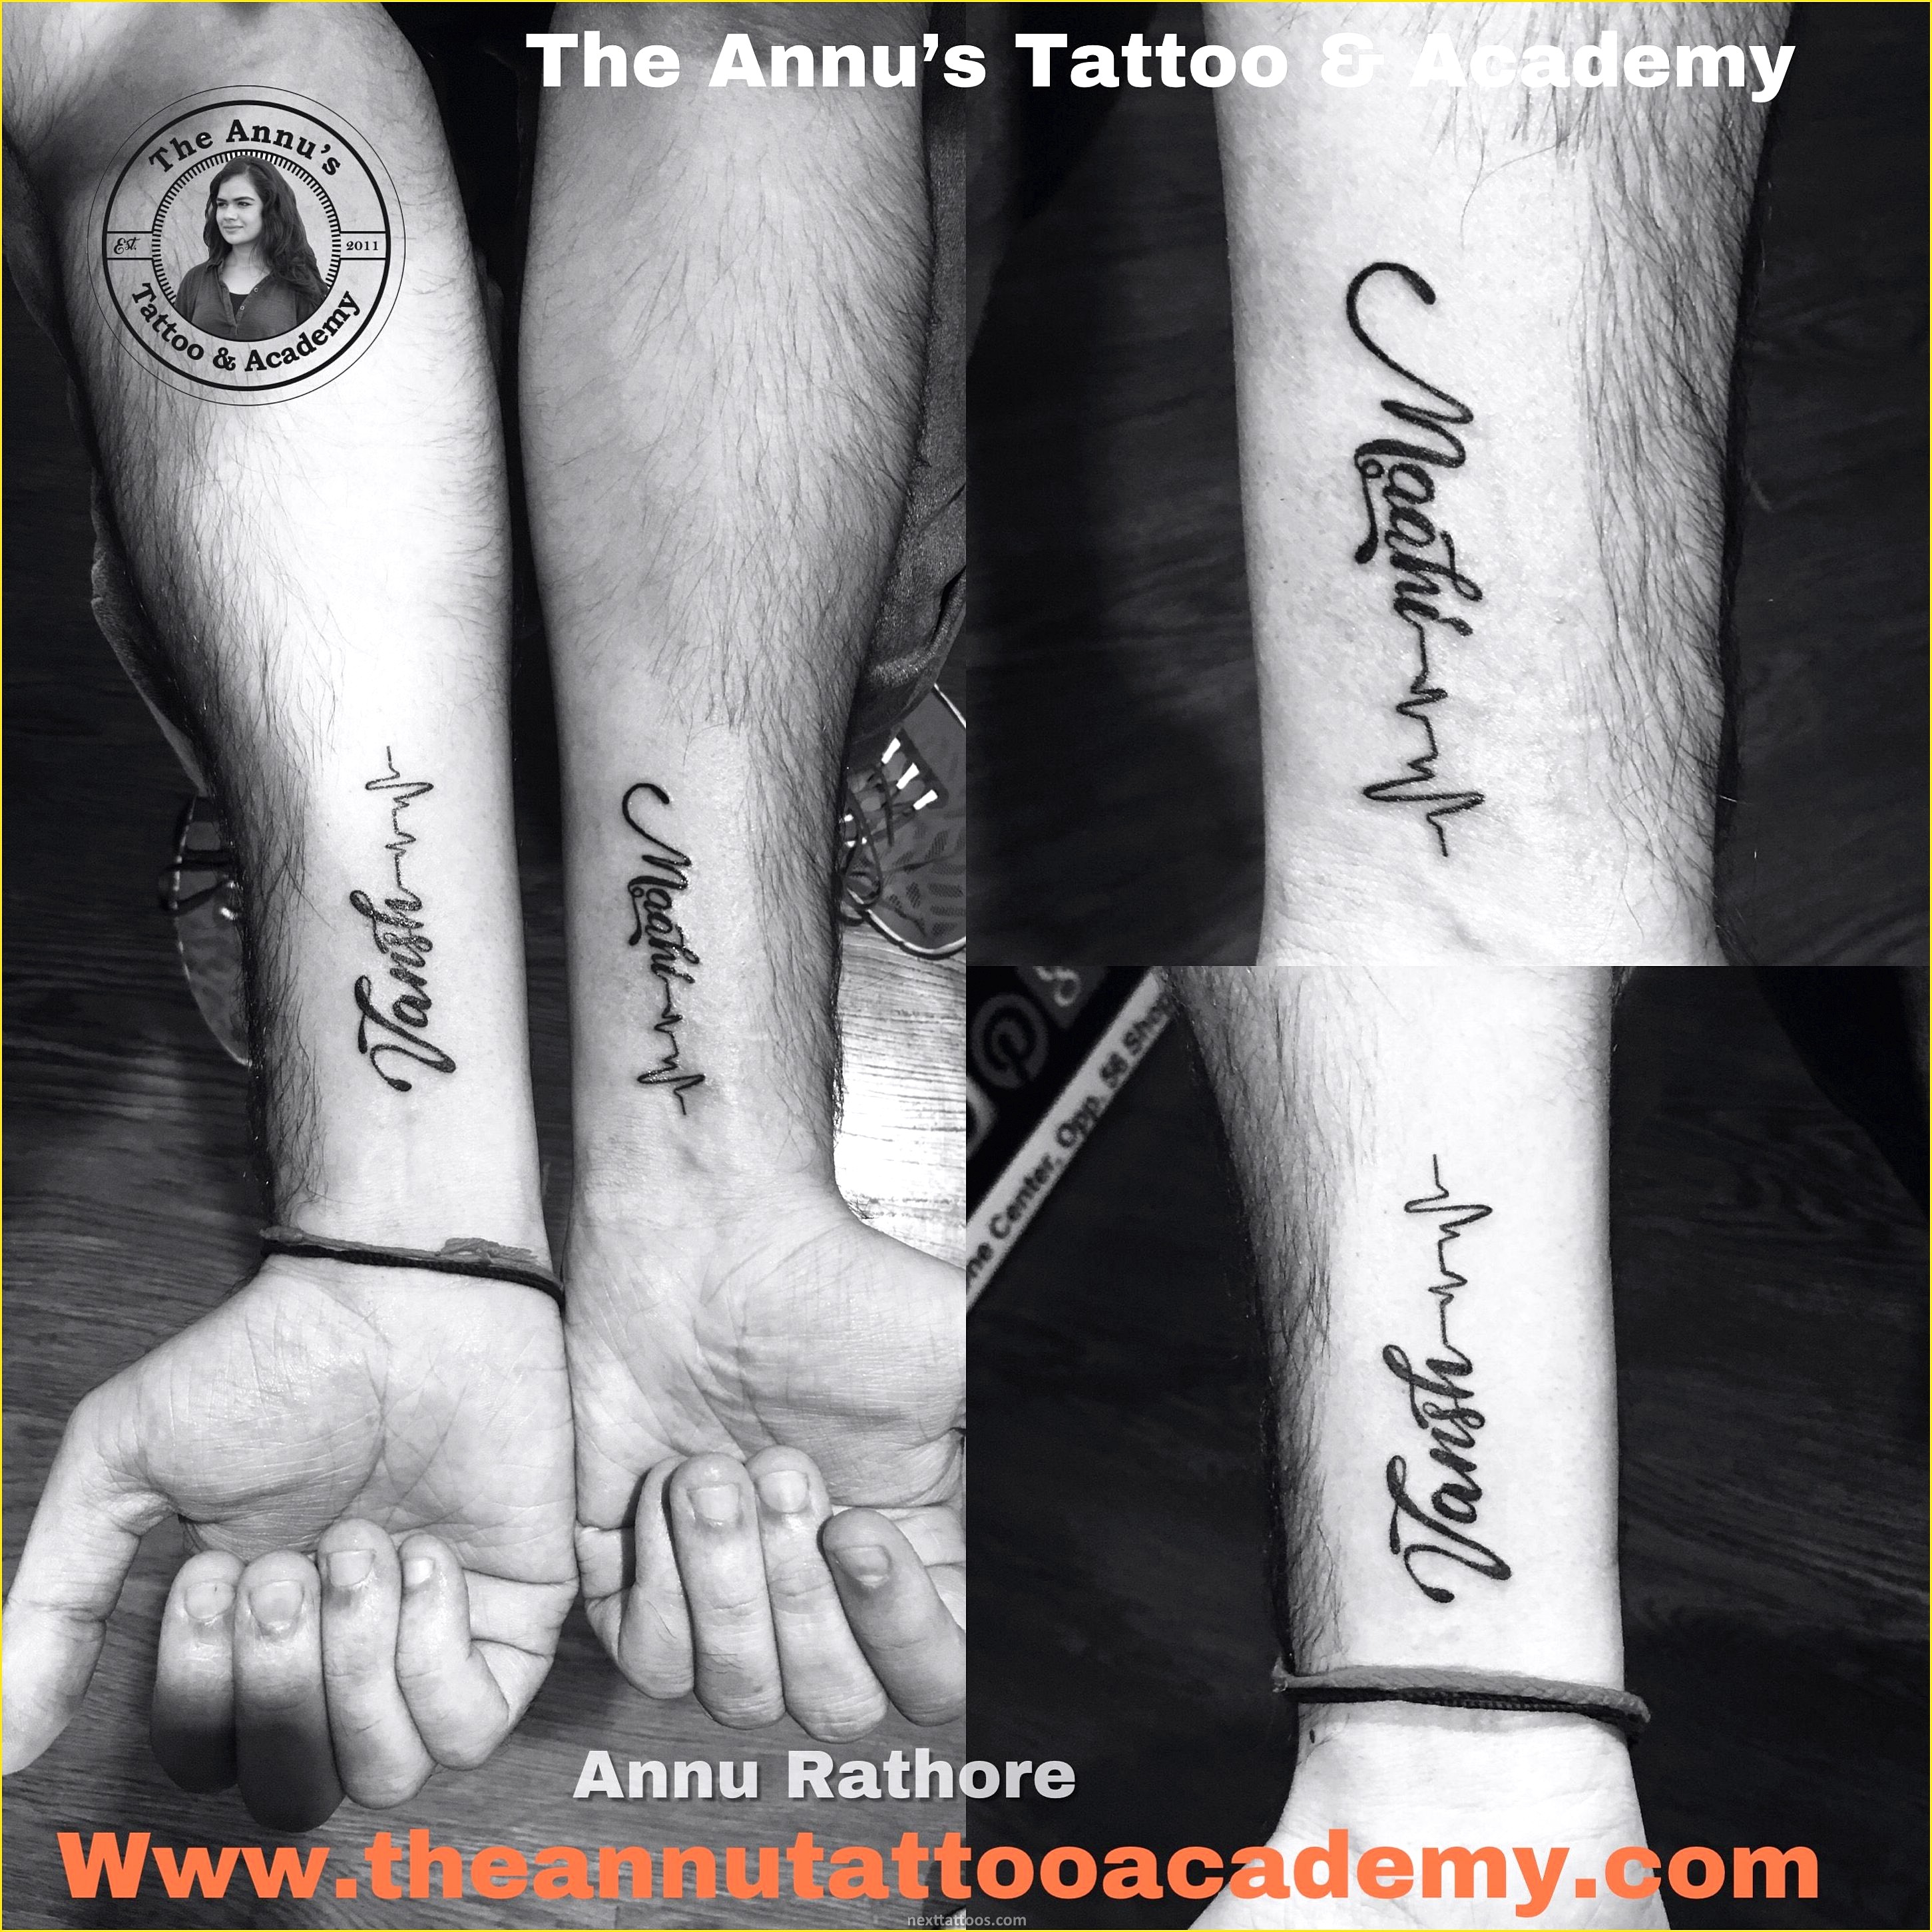 Female Name Tattoo Designs - The Best Places For a Feminine Tattoo